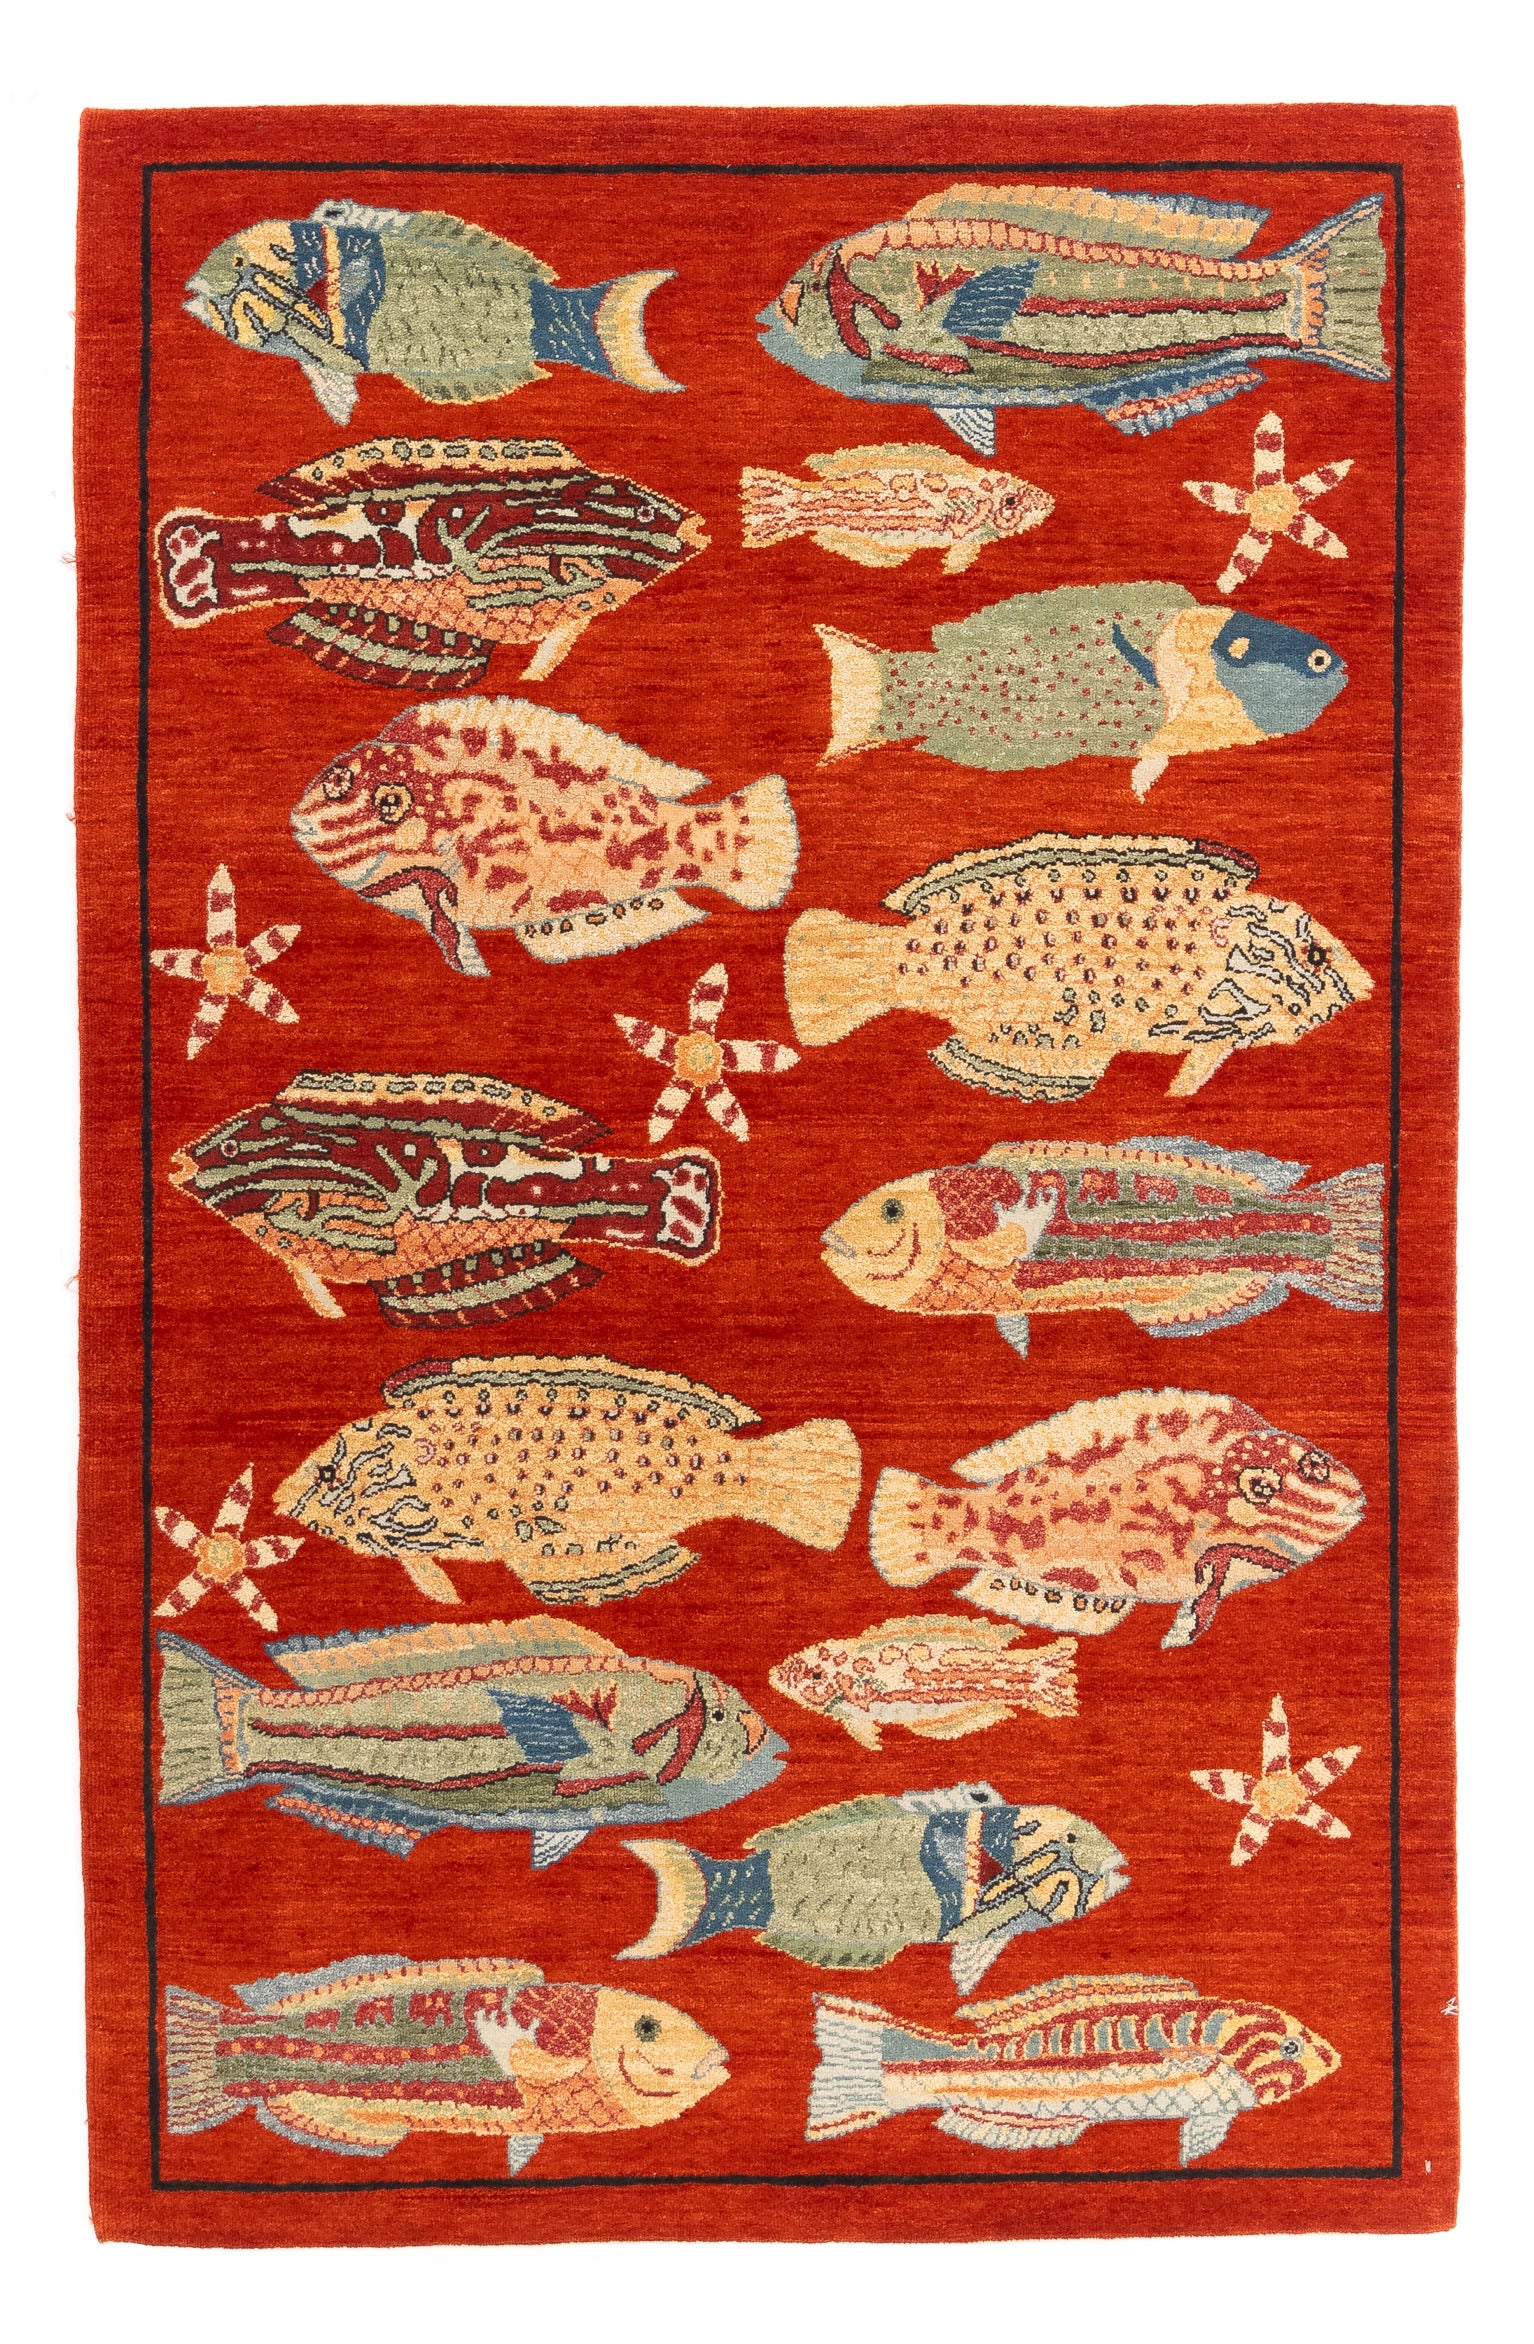 New Indian Coral Reef Rug 4'1 x 6'3